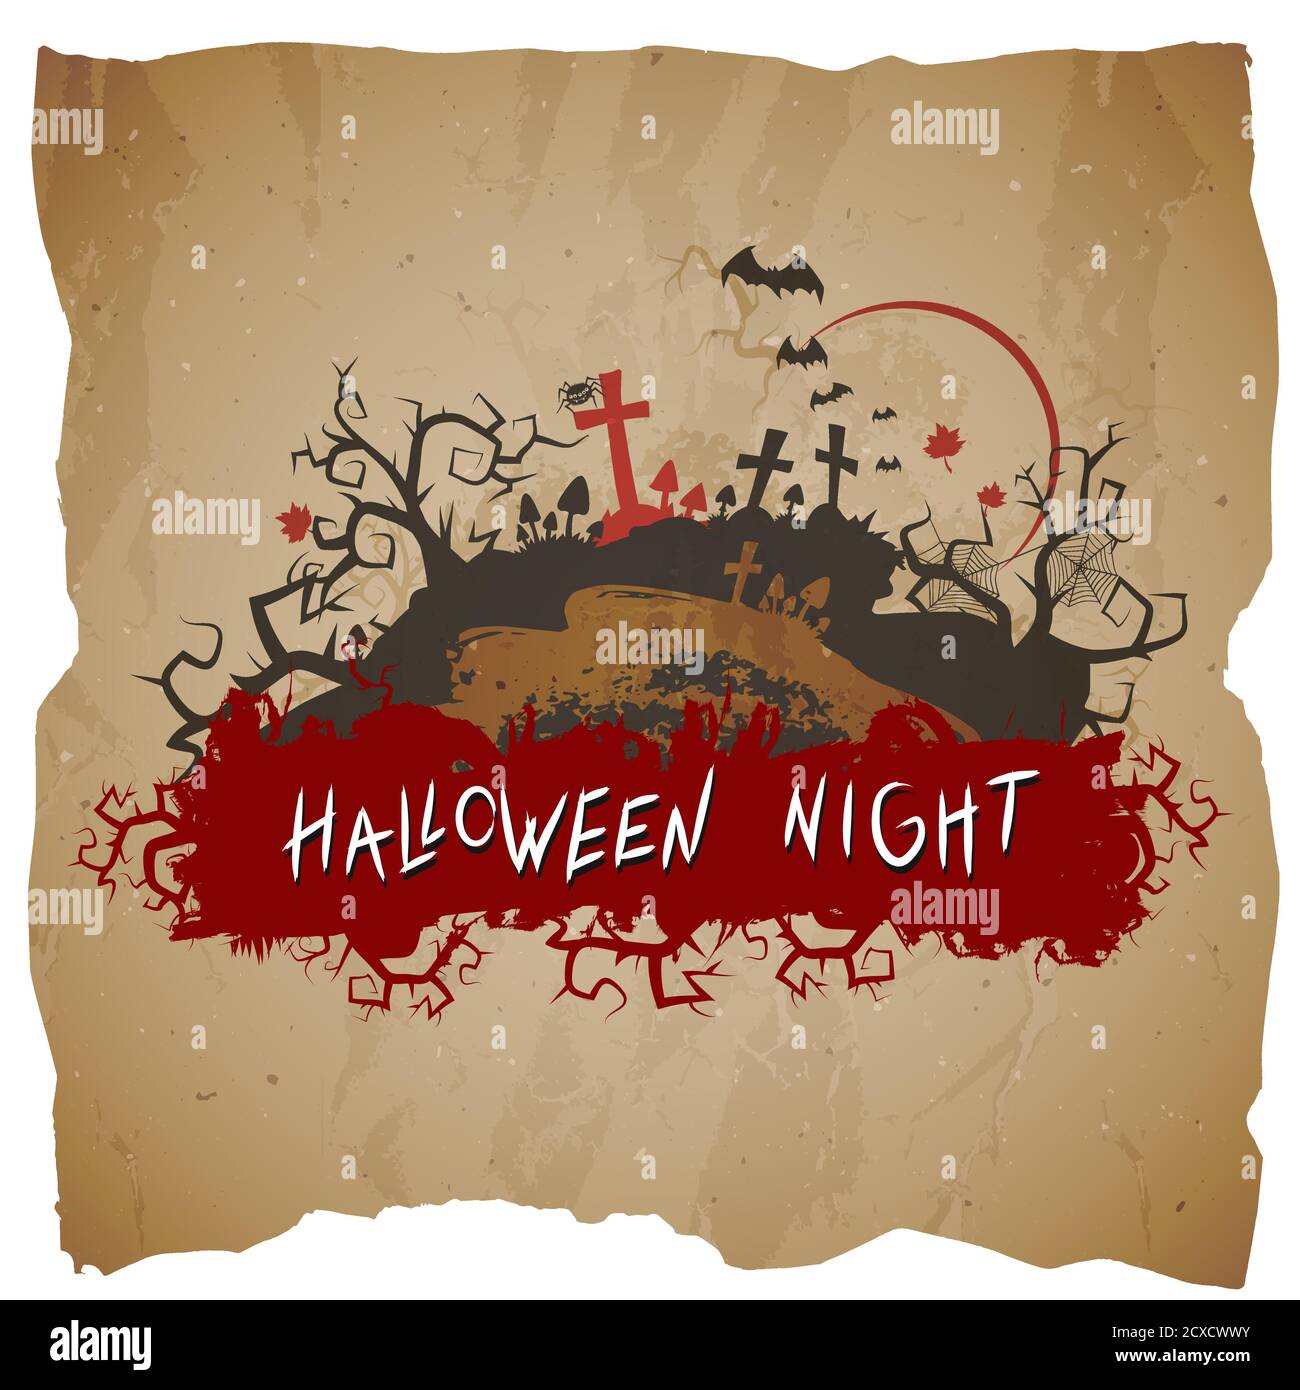 Vector Halloween illustration with cemetery and inscription on grunge background. Stock Vector